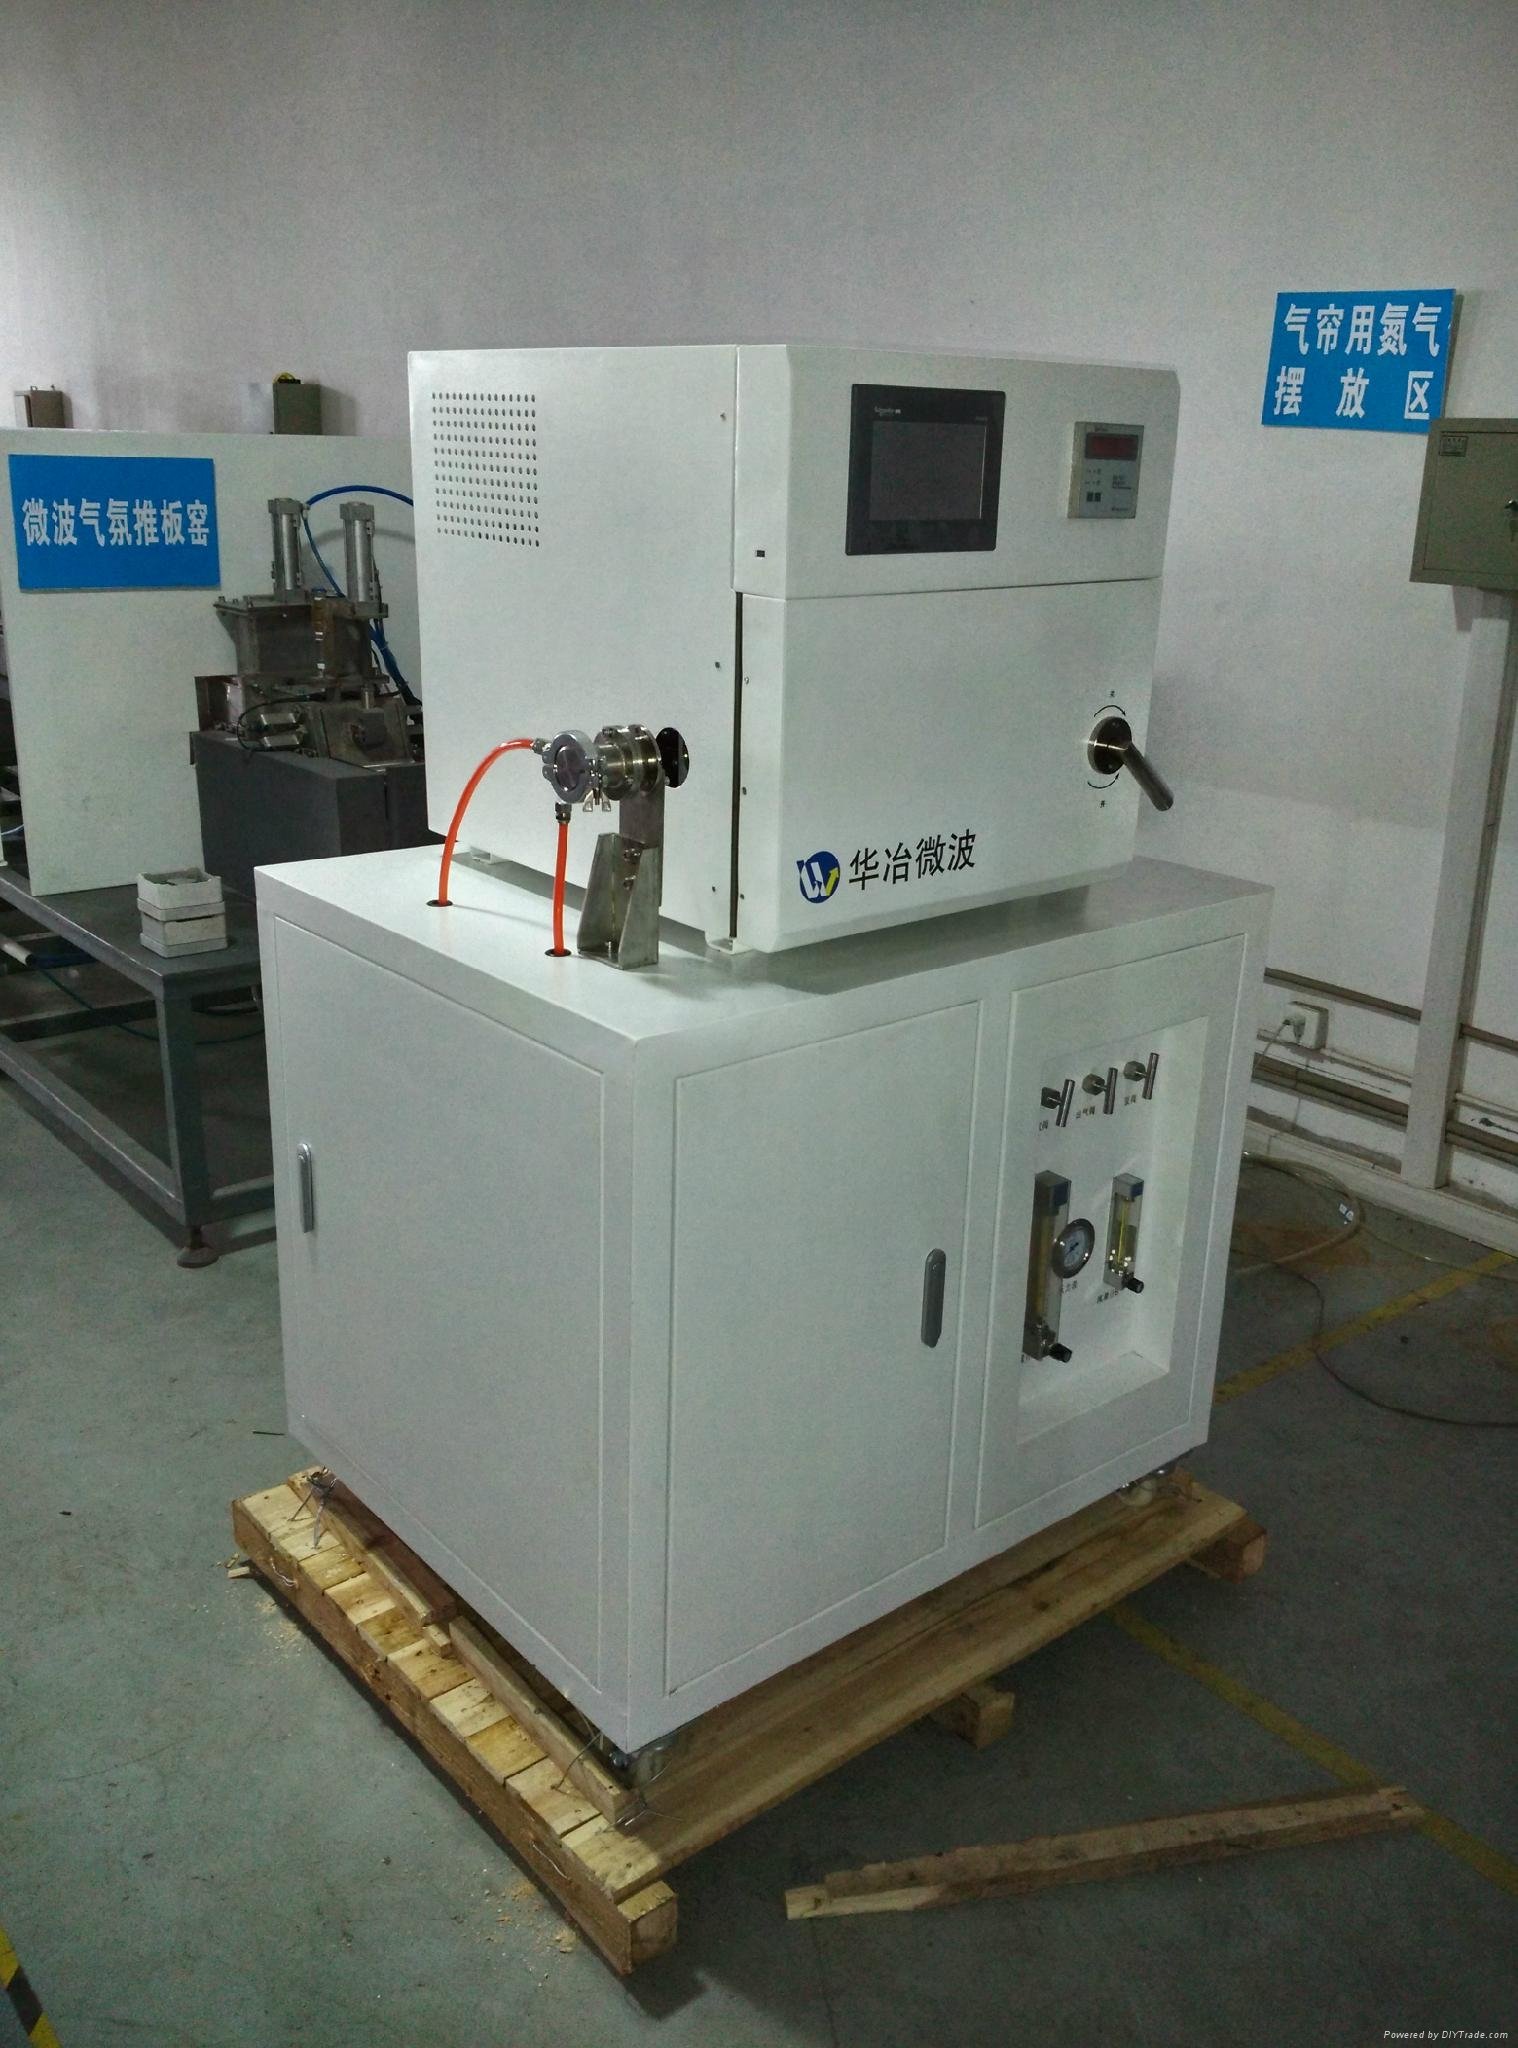 industrial Microwave furnace 1700 degree 2.45GHz microwave oven 5